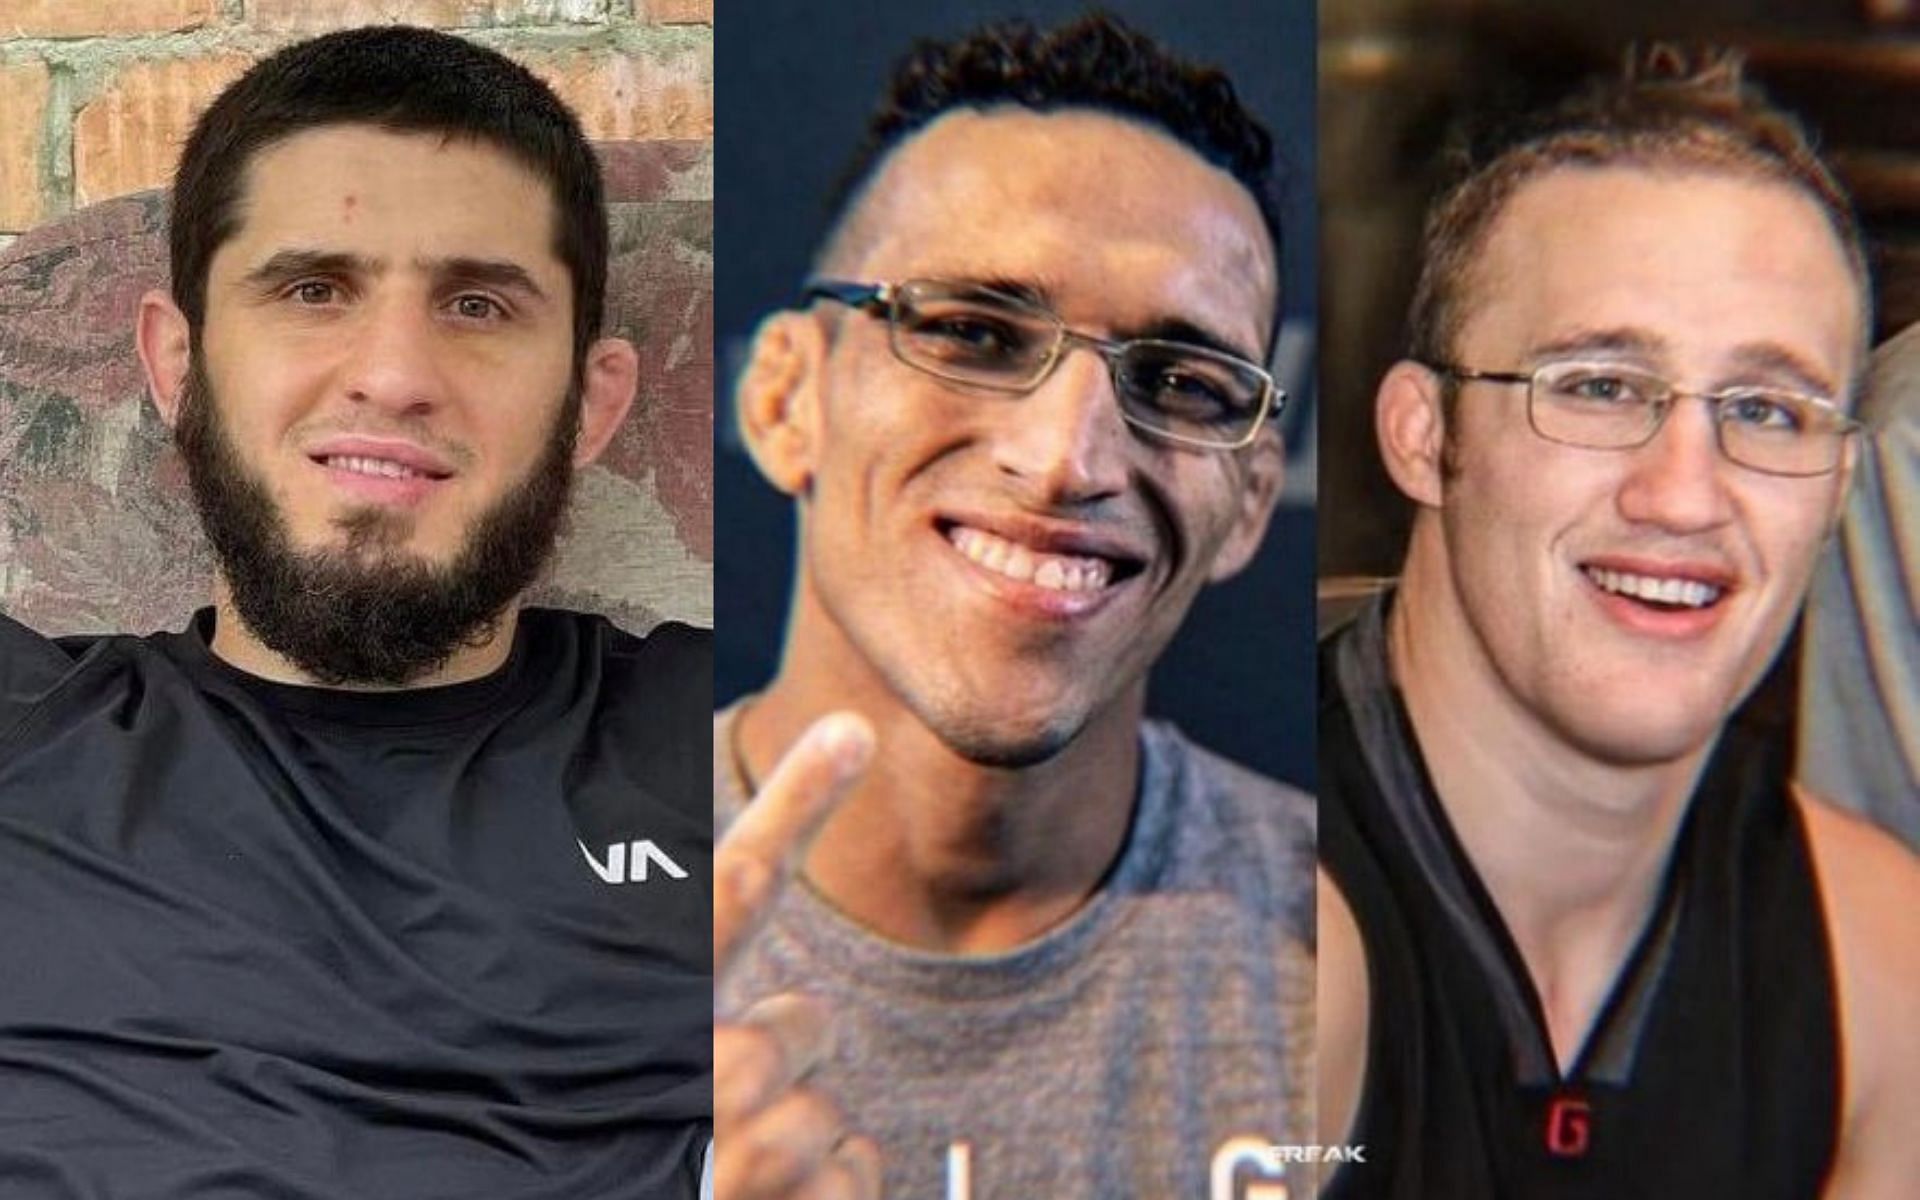 From left to right: Islam Makhachev, Charles Oliveira and Justin Gaethje [Image Courtesy: @MAKHACHEVMMA on Twitter]